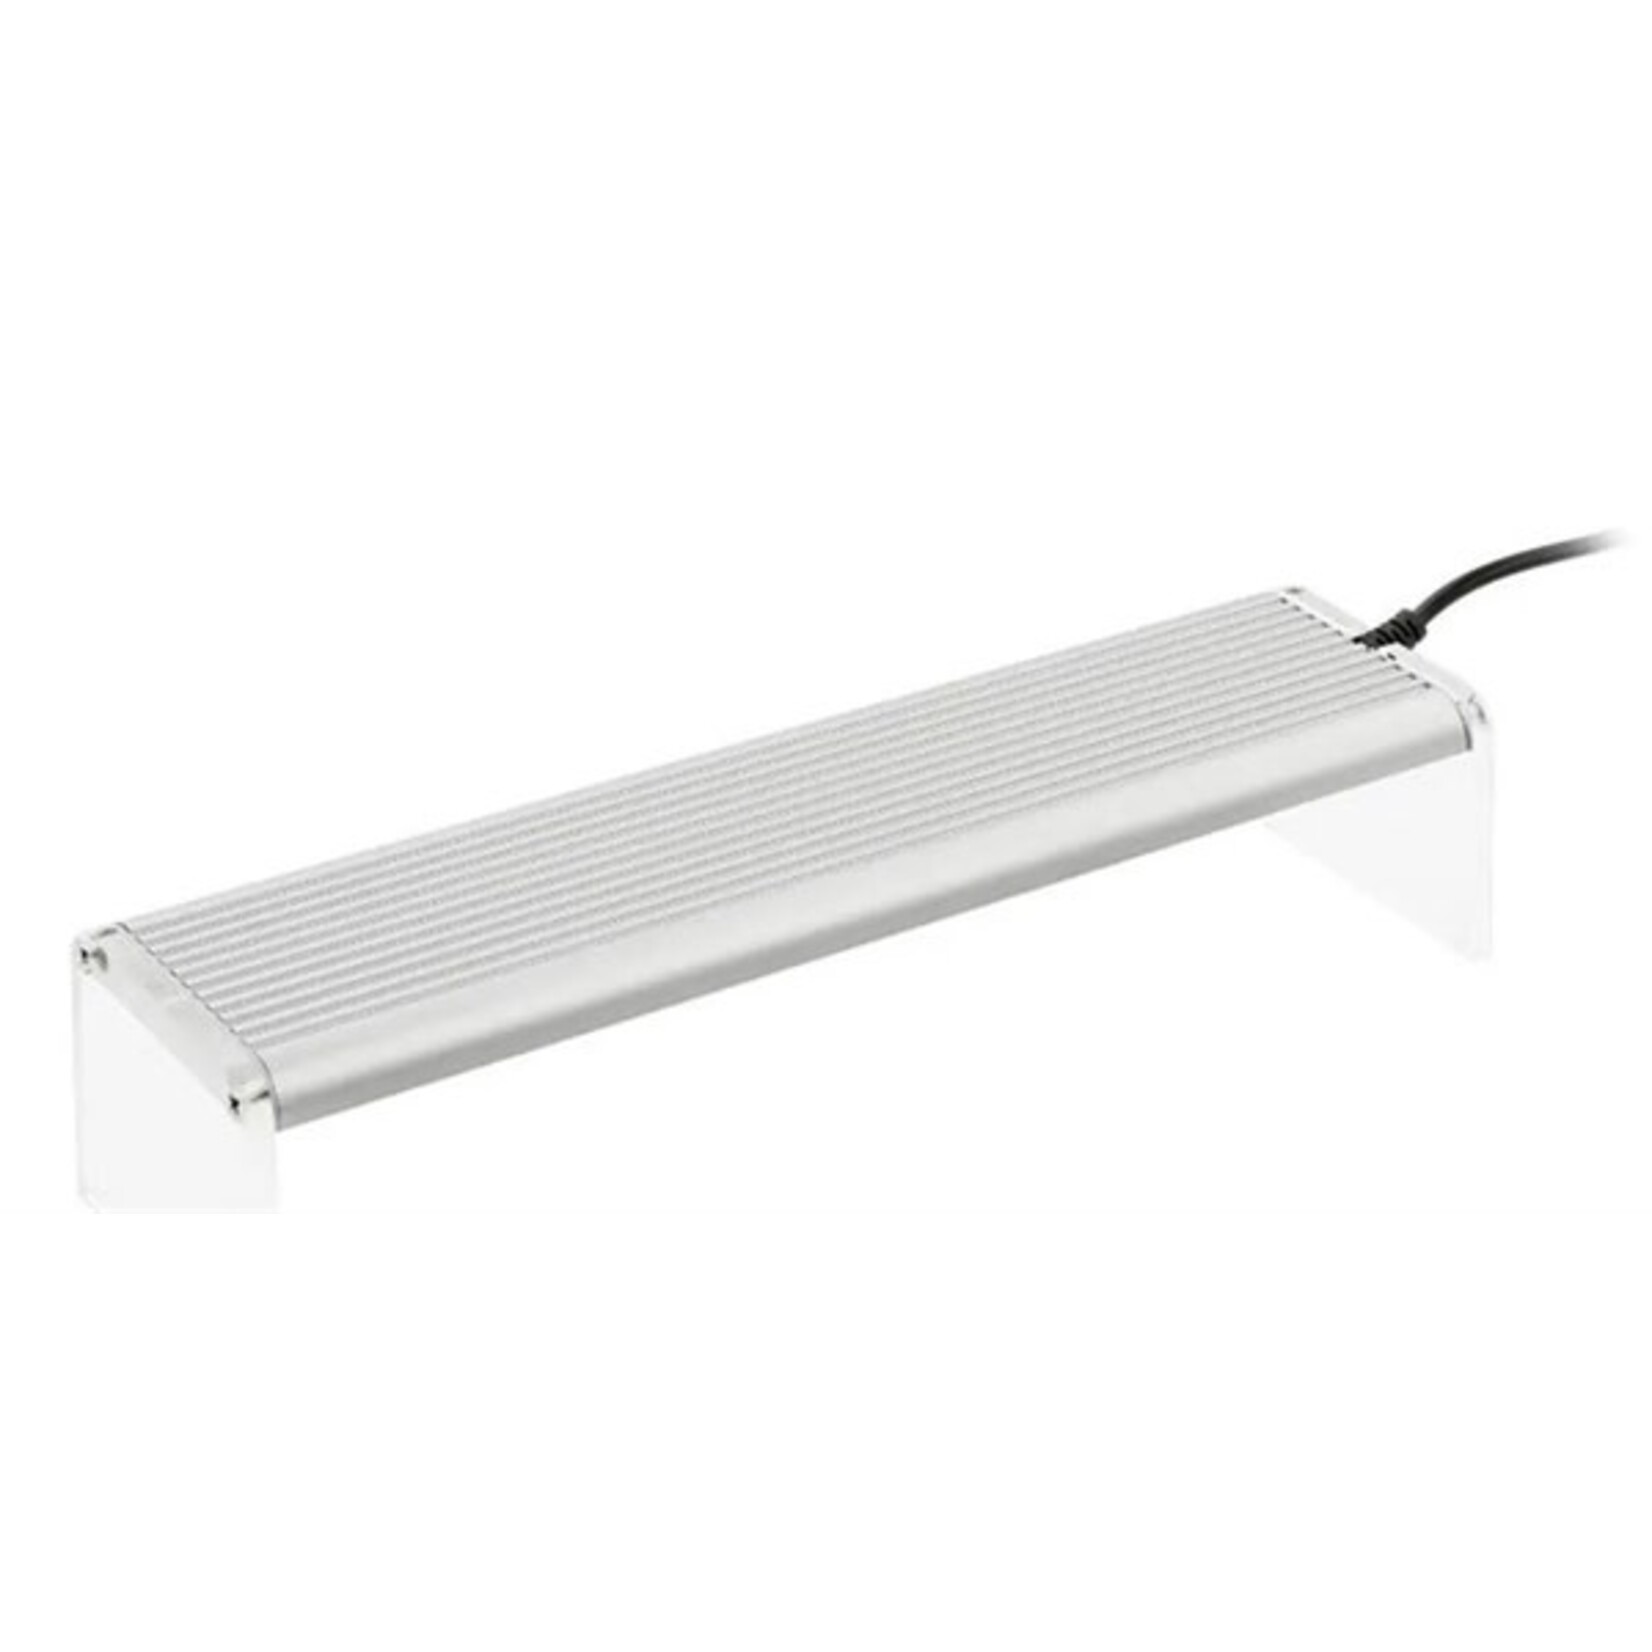 Chihiros A LED A311 31 cm 18 w - incl. Duitse trafo